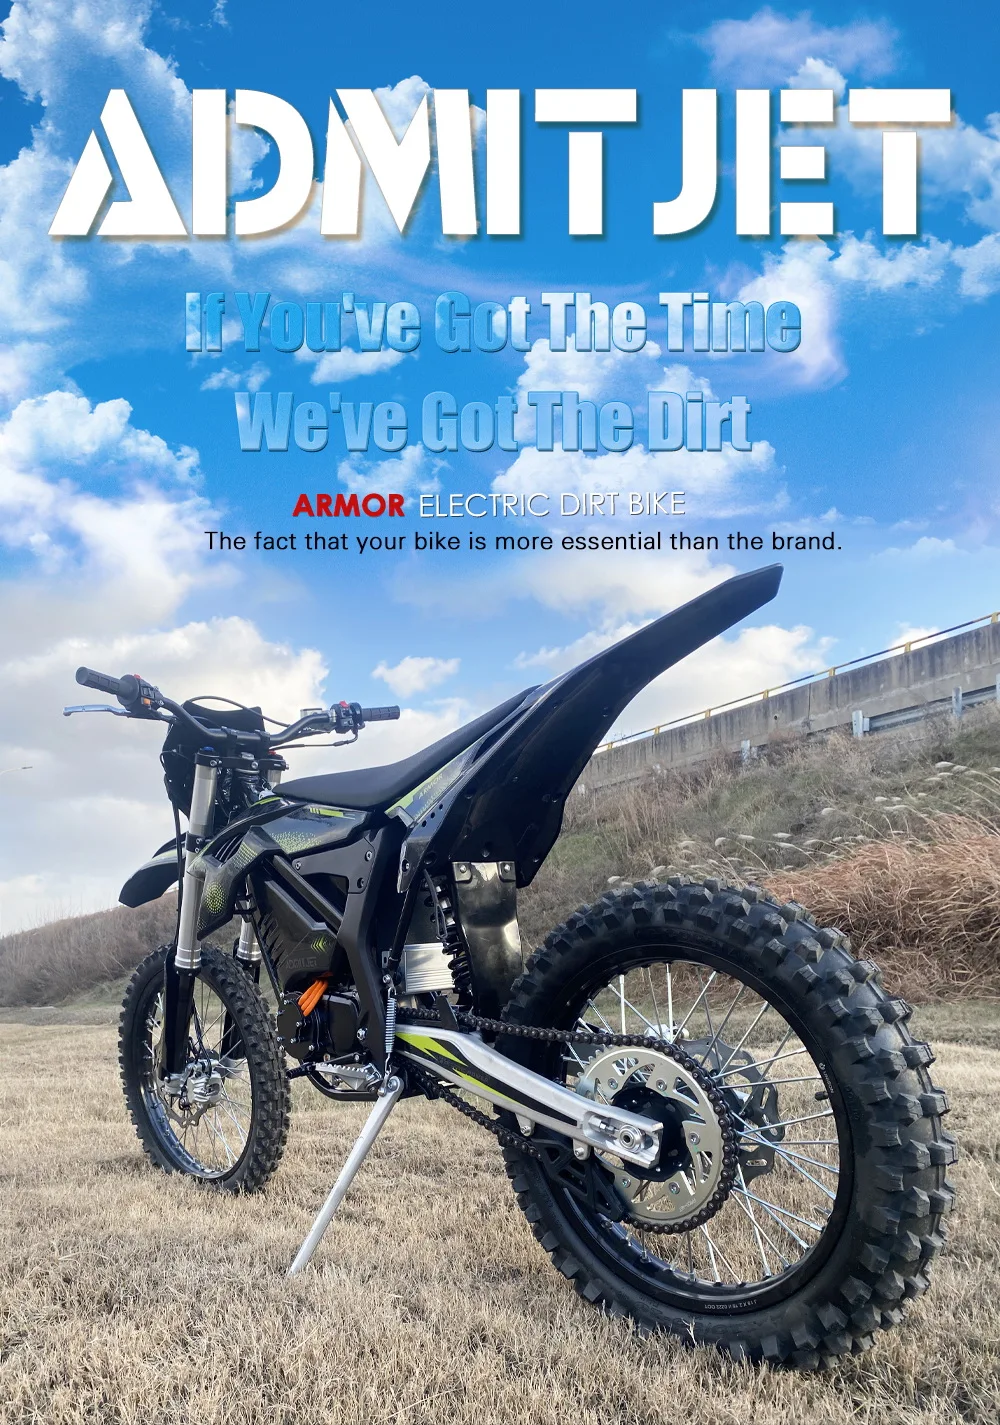 Best E Dirt Bikes Exploring the Top Choices With AdmitJet